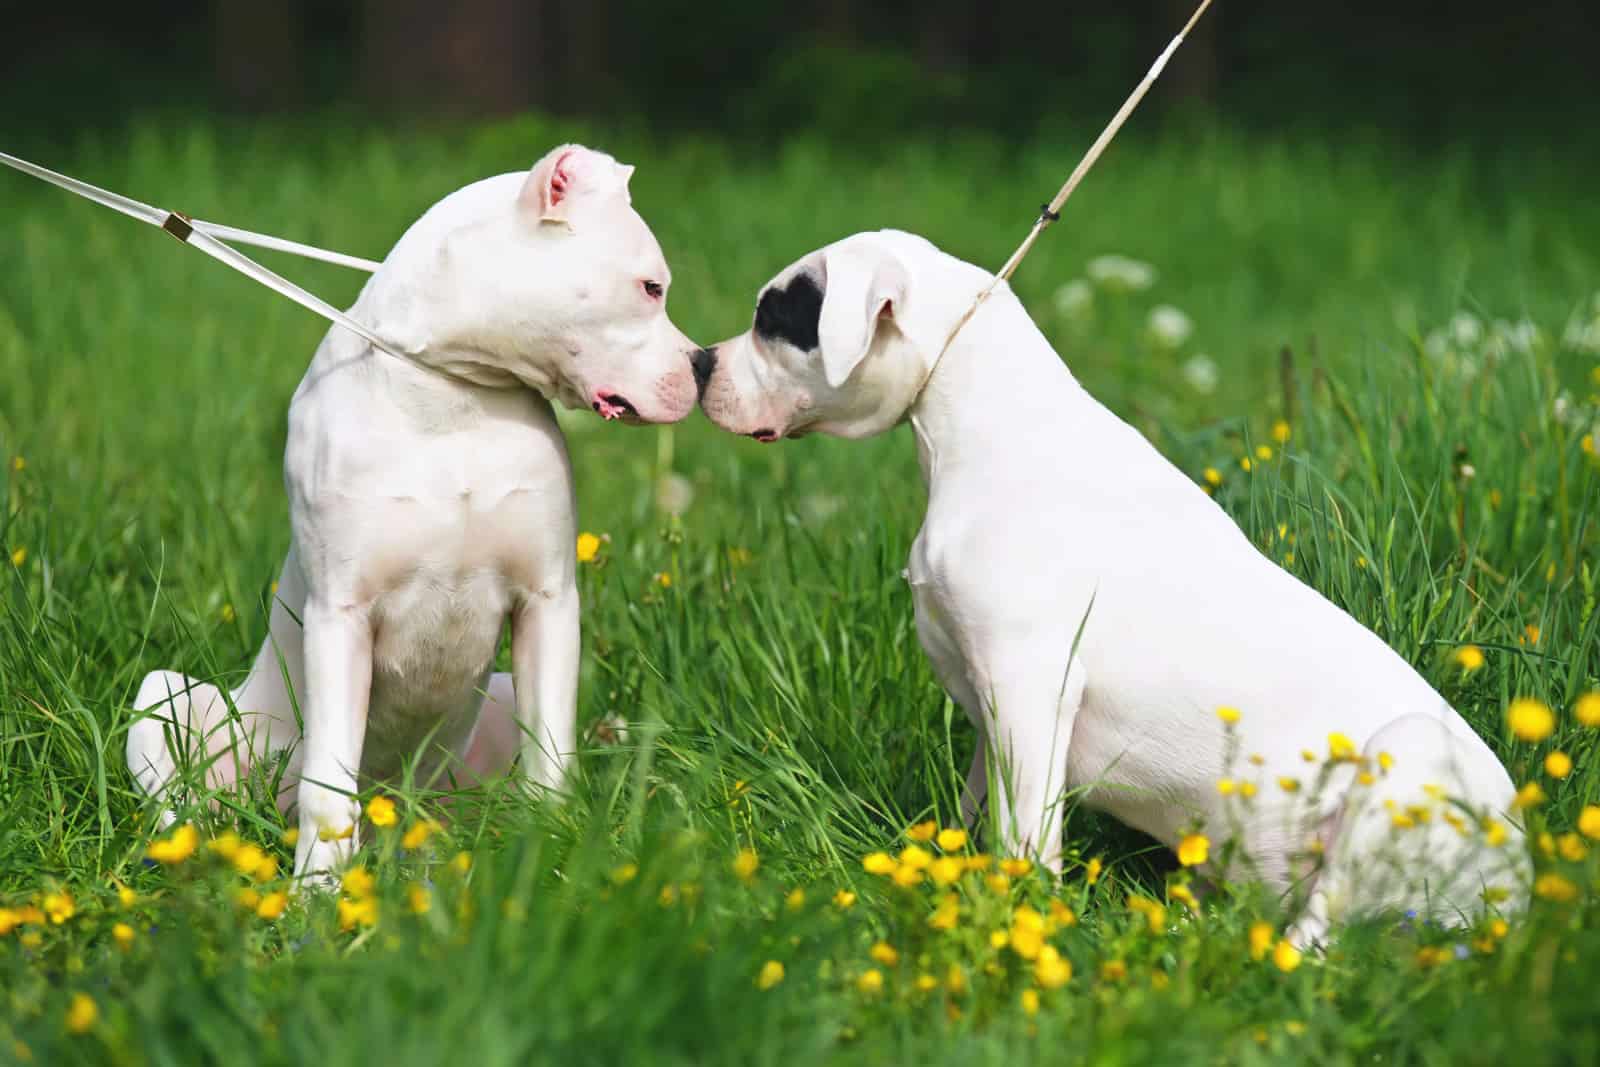 Two Dogo Argentino dogs sitting outdoors on a green grass and sniffing each other